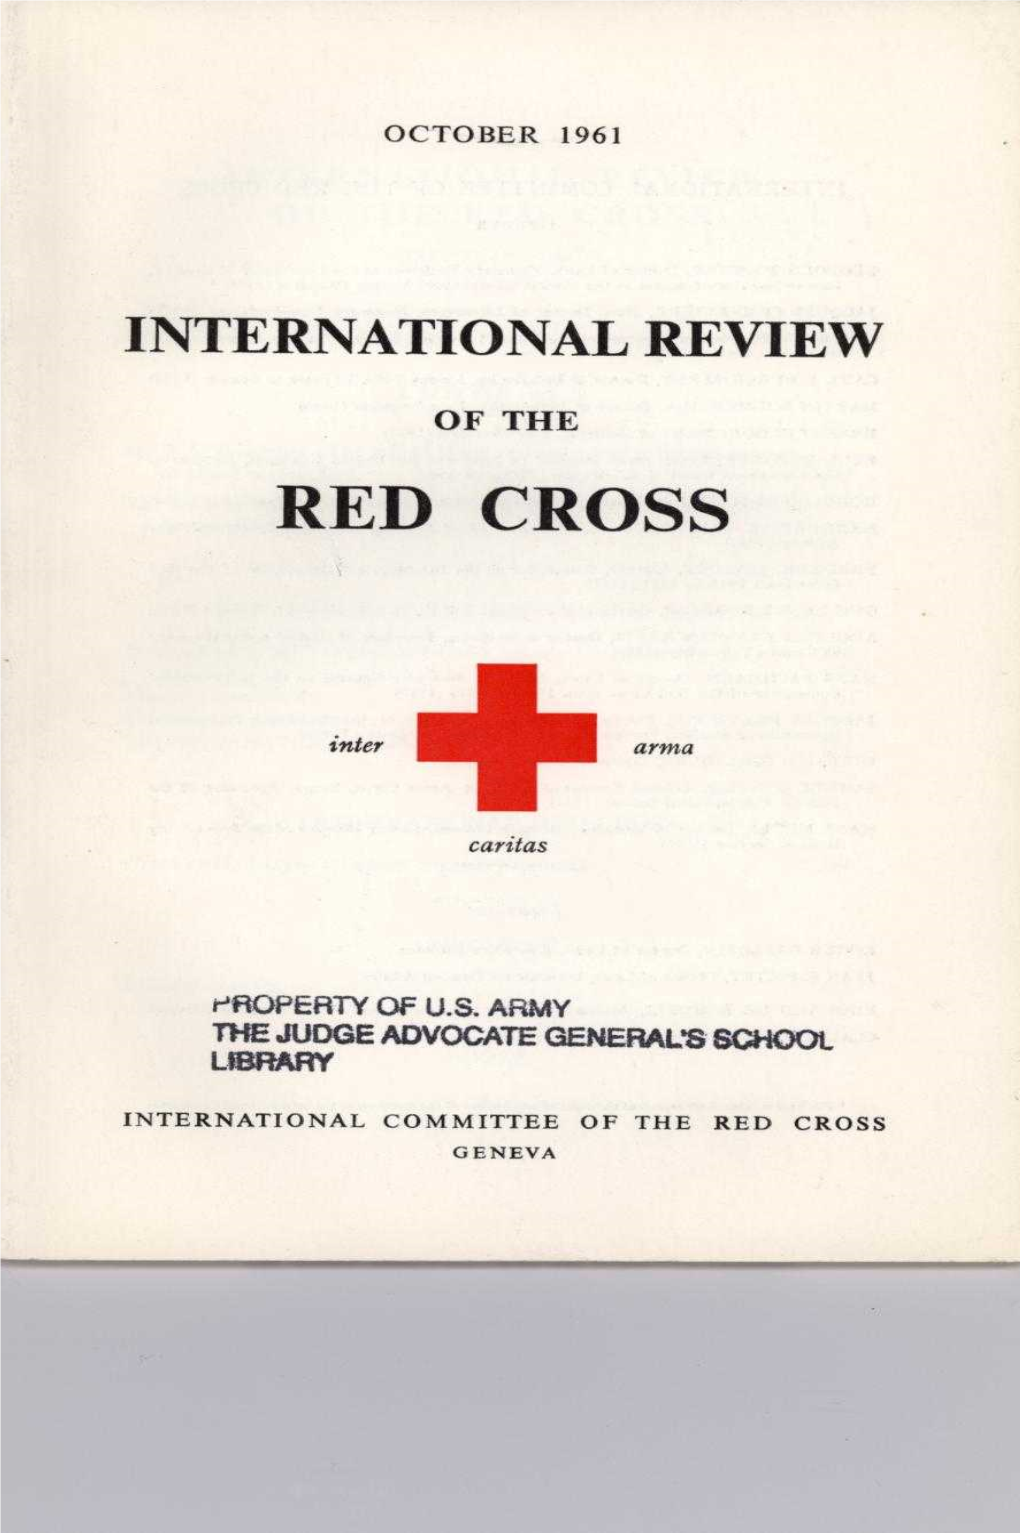 International Review of the Red Cross